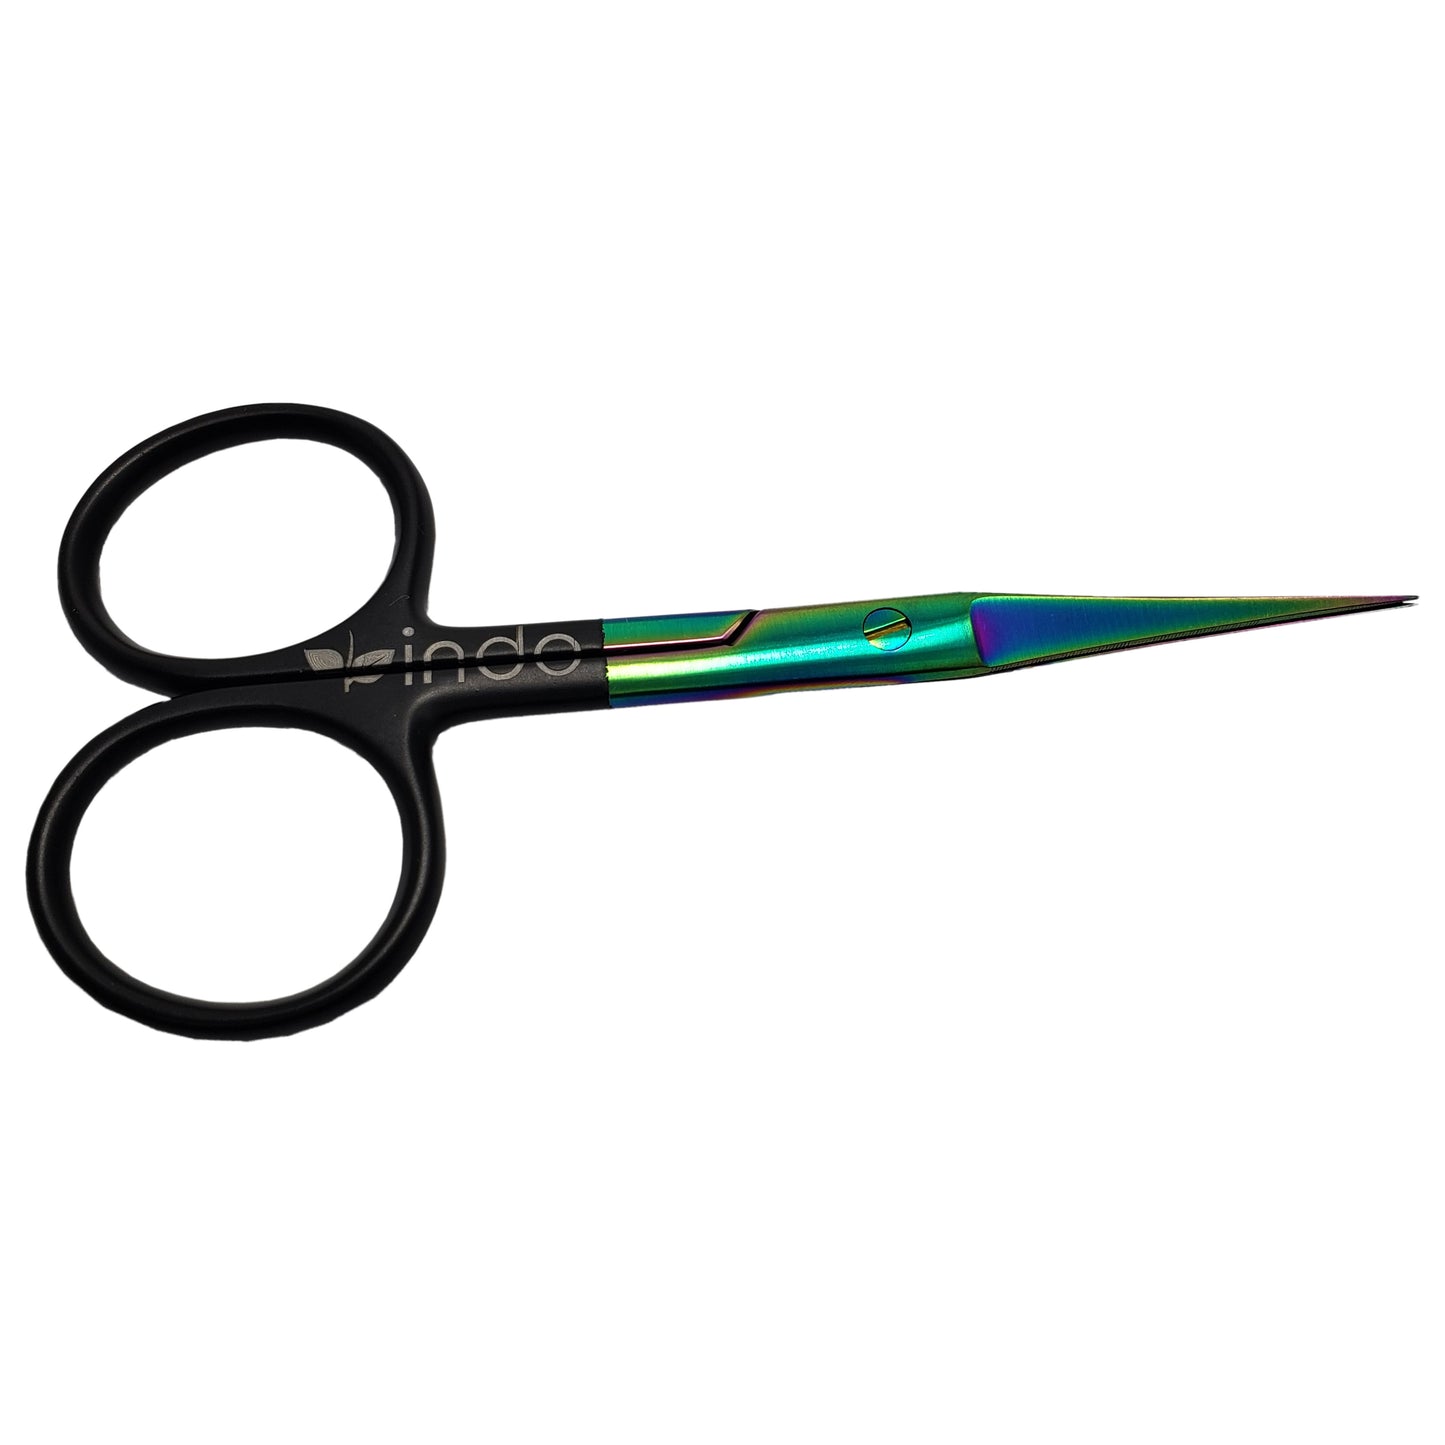 Easy Root and Cloning Scissors - Cloning and Rooting Hormone Plus Razor Sharp Snips for Cloning or Trimming